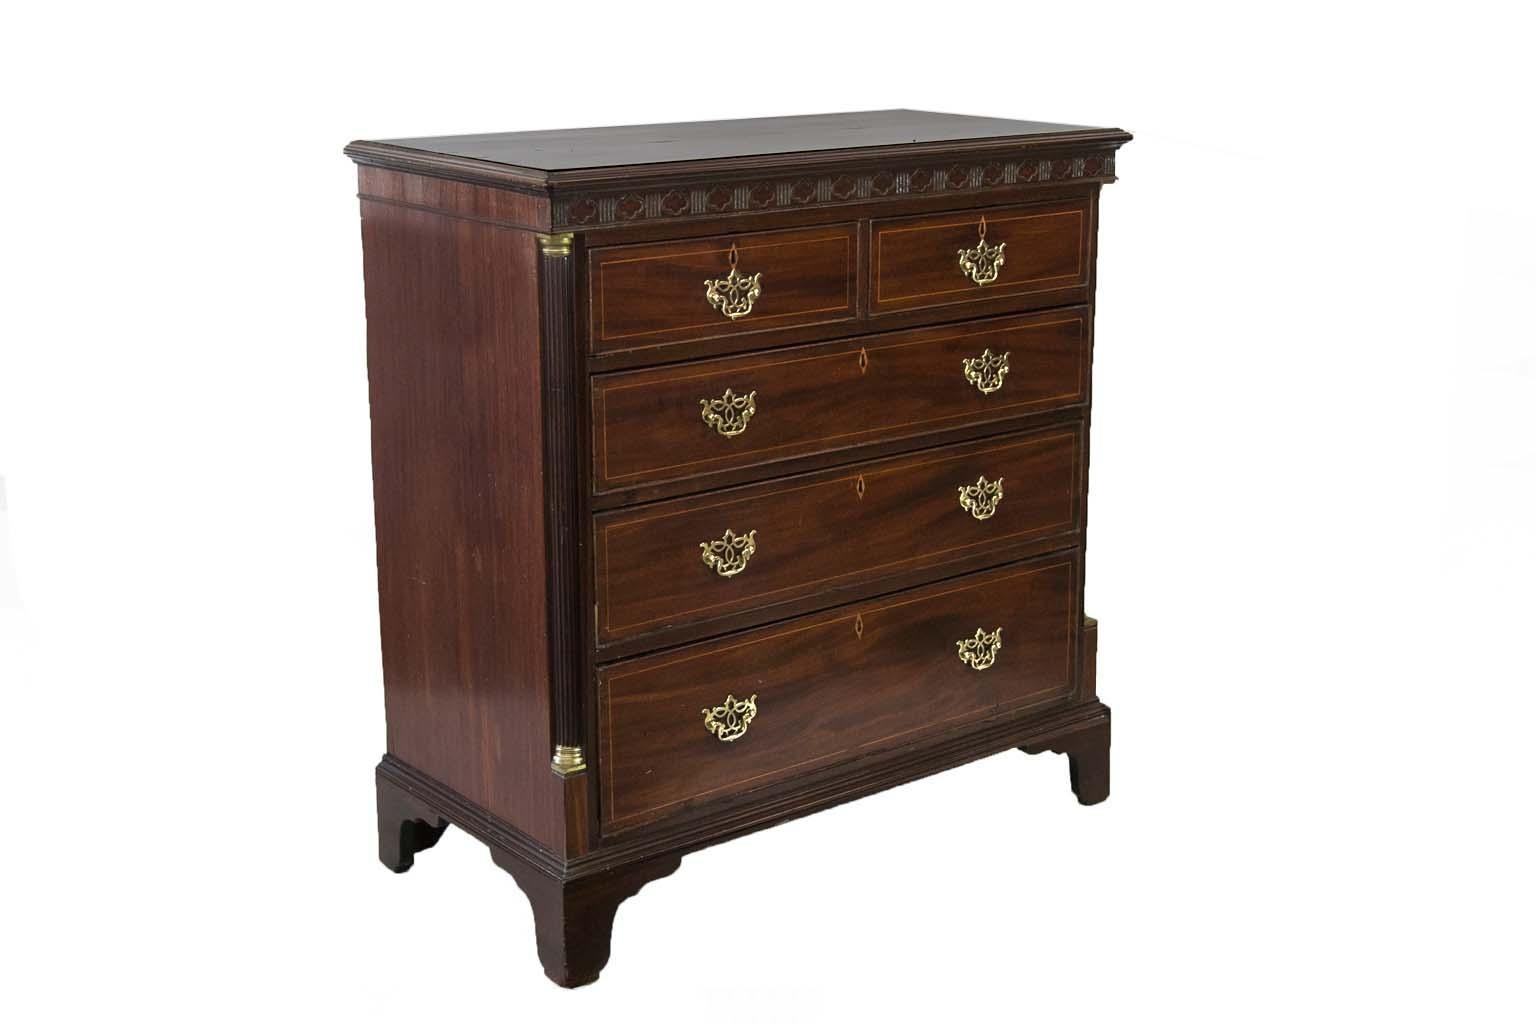 Late 18th Century English Mahogany Five-Drawer Chest For Sale